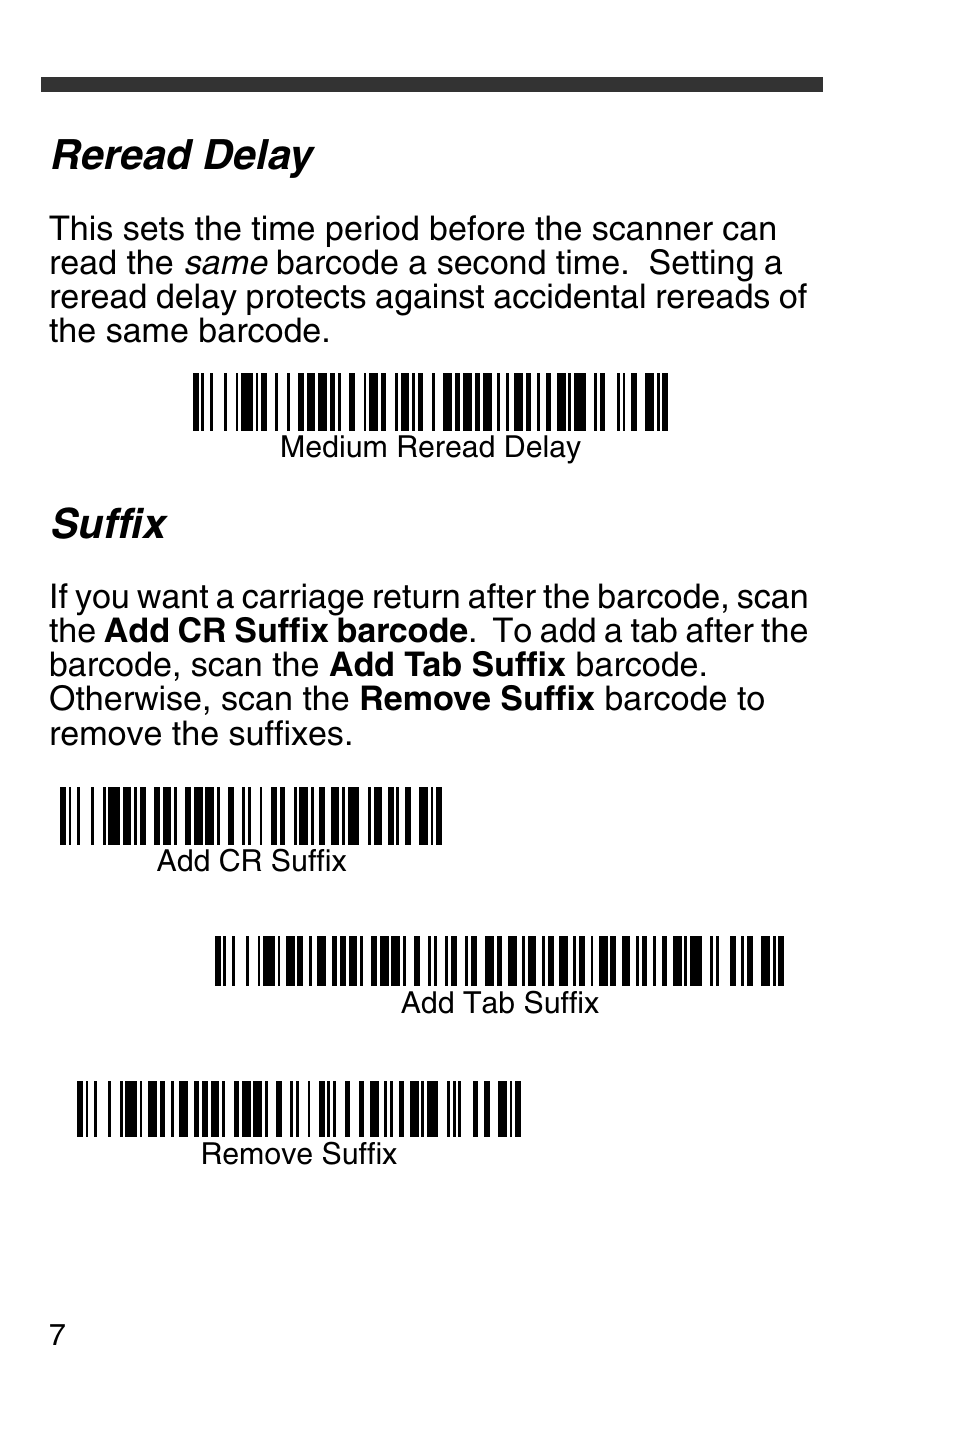 Reread delay, Suffix | Honeywell 4600g User Manual | Page 8 / 20